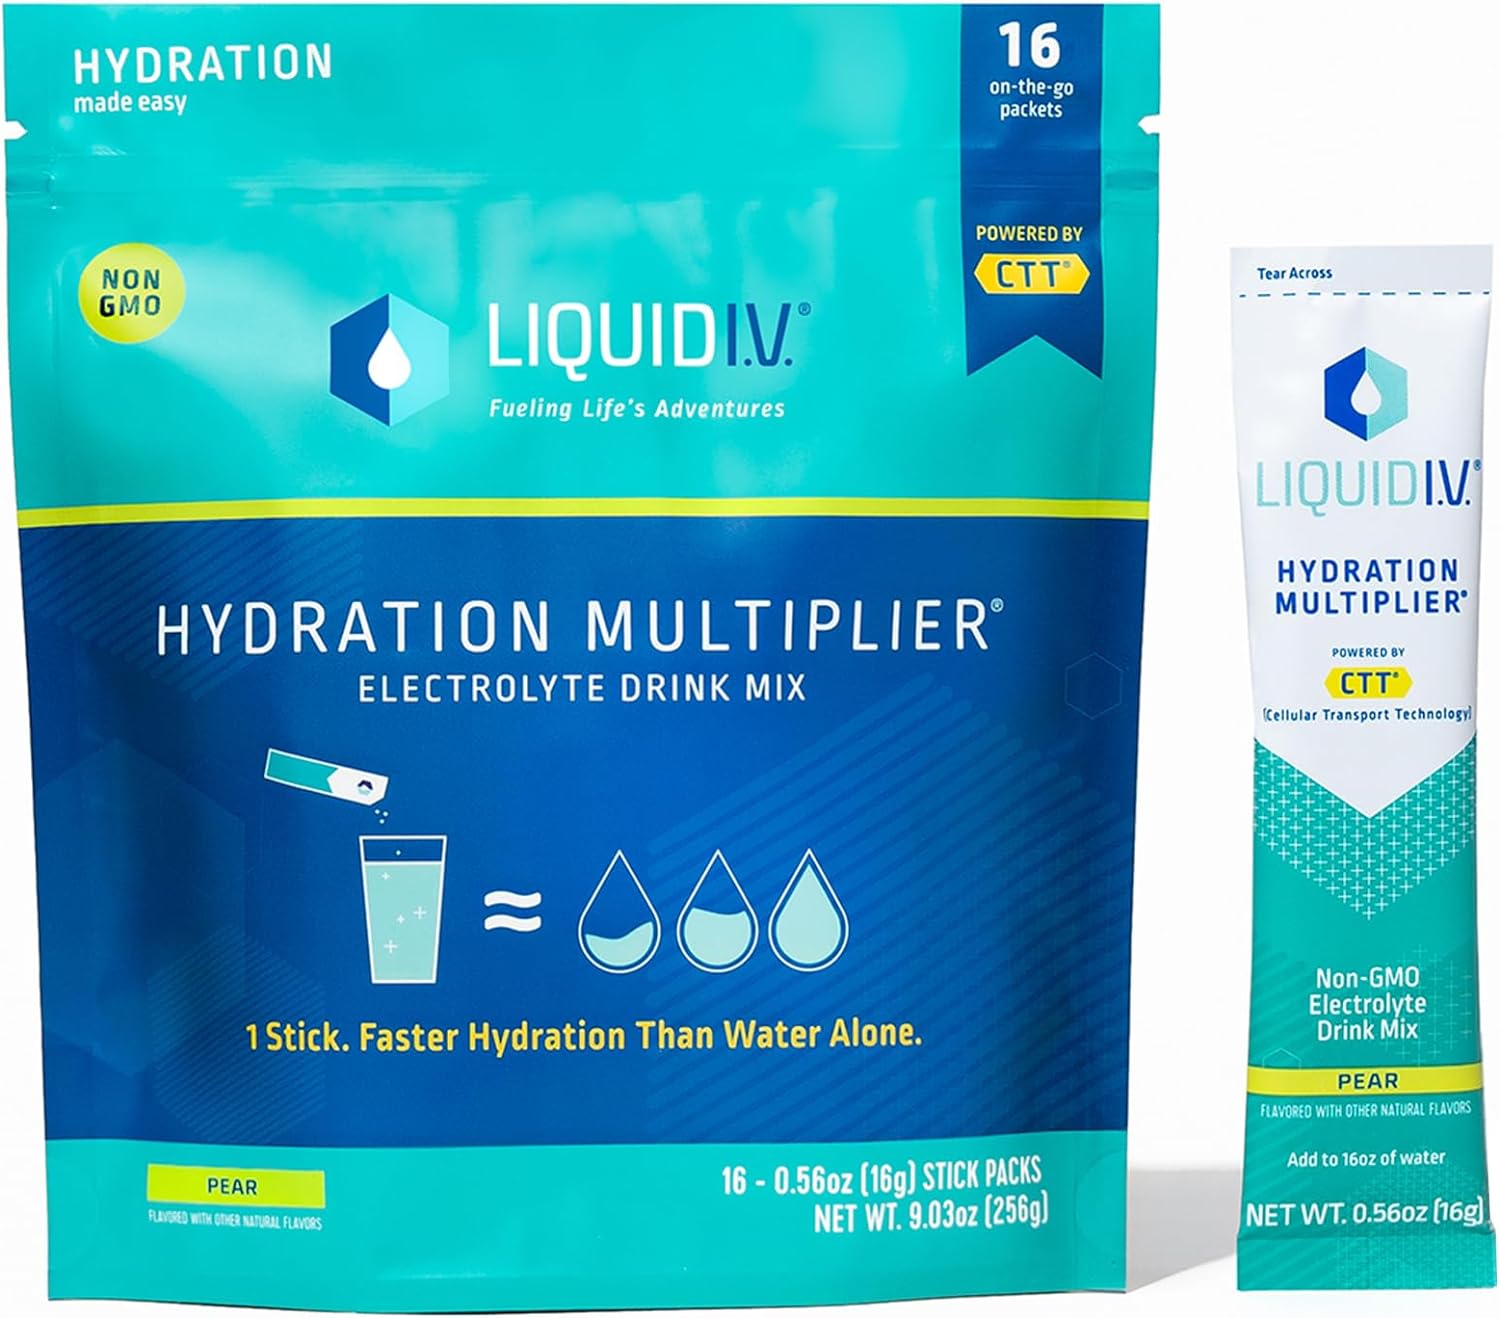 Liquid I.V. Hydration Multiplier - Pear - Hydration Powder Packets | Electrolyte Powder Drink Mix | Easy Open Single-Serving Servings | Non-GMO | 1 Pack (16 Servings)